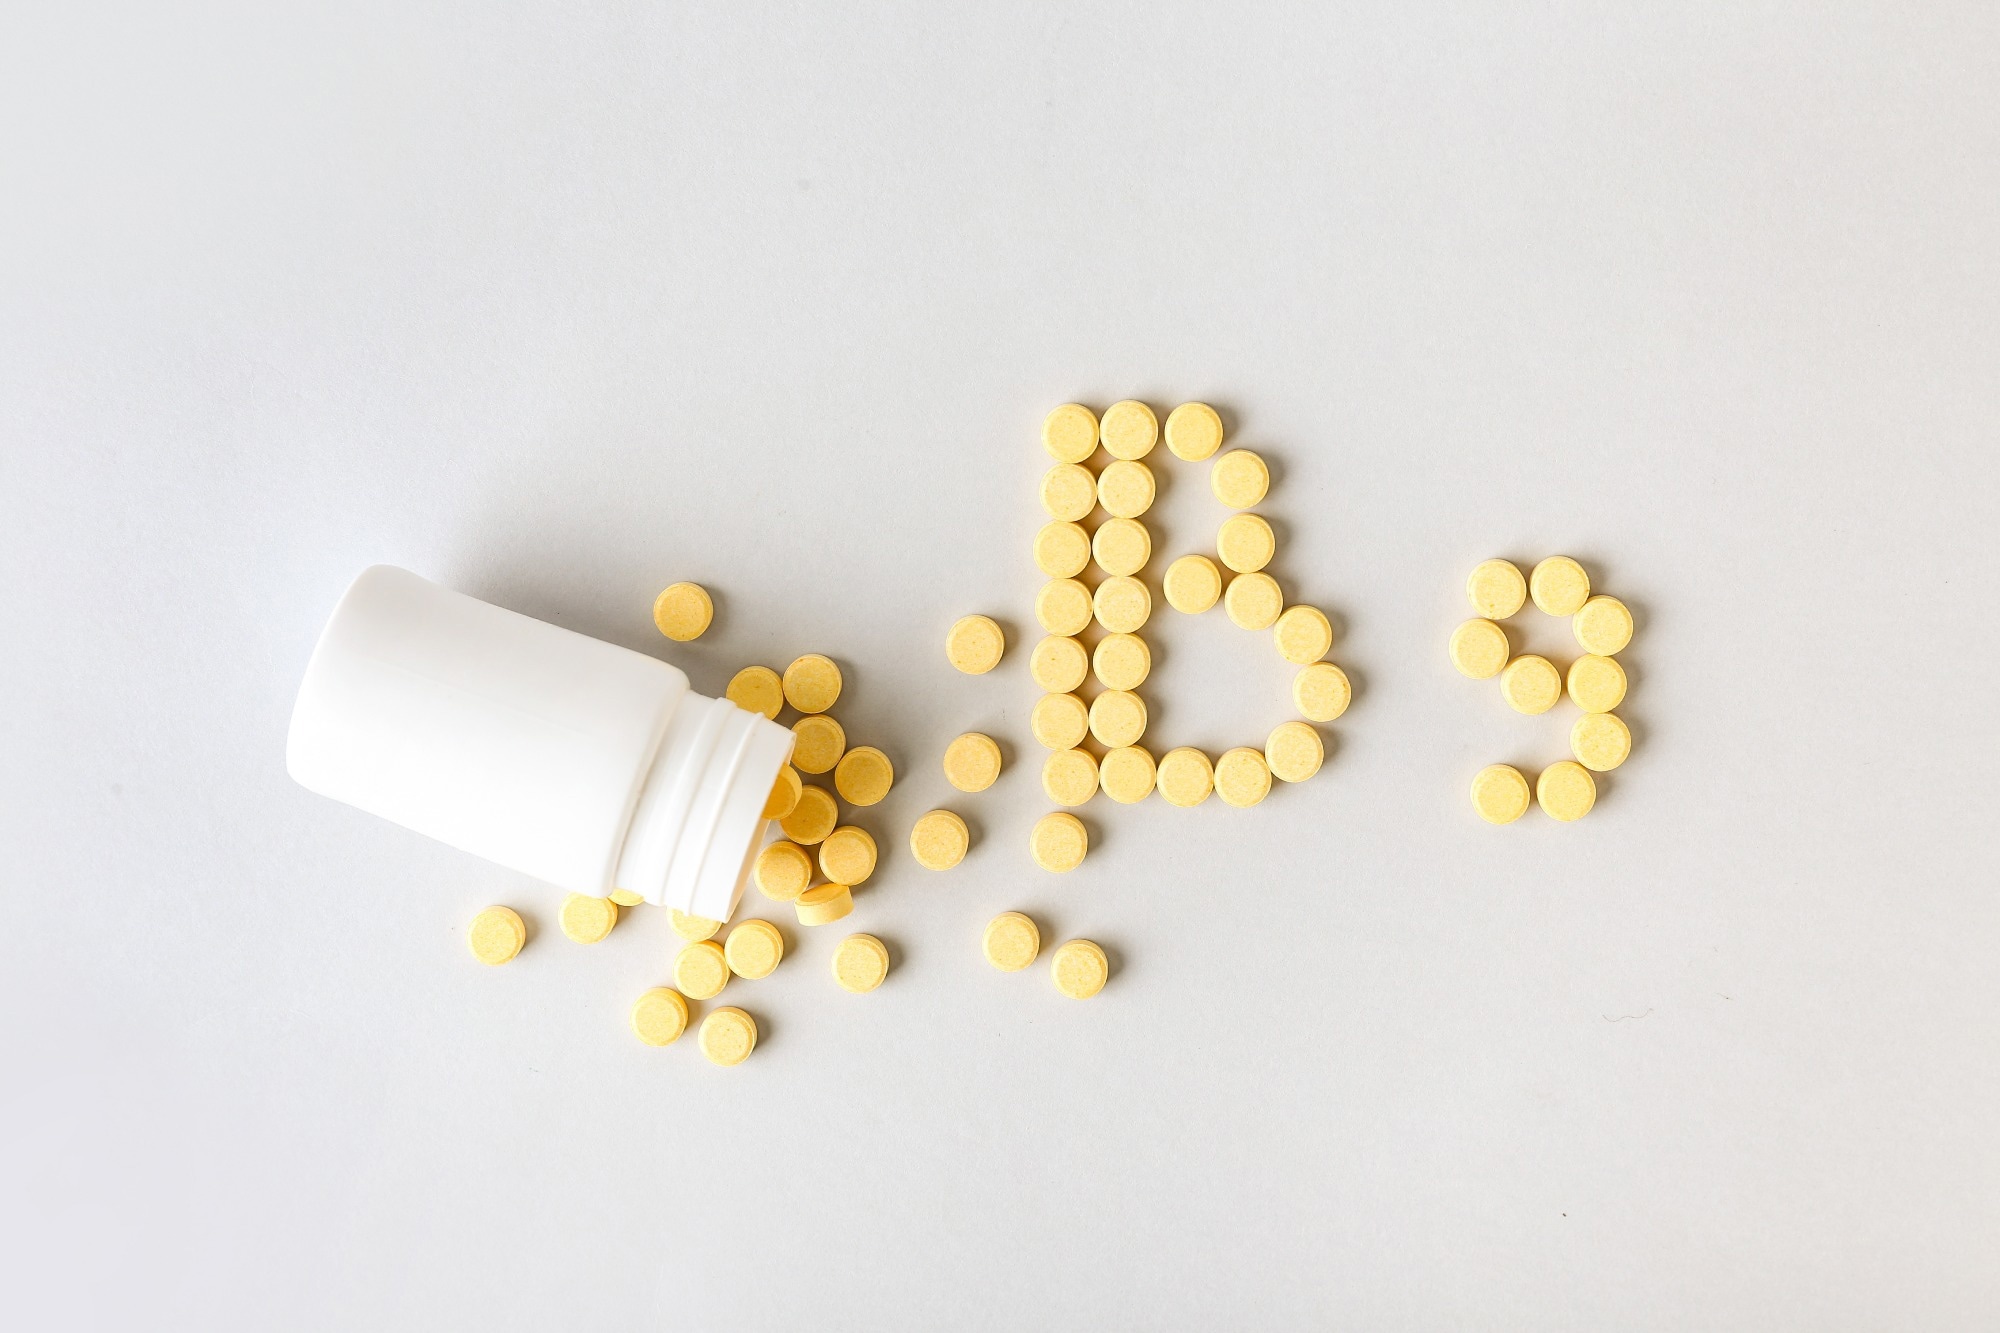 Study: Folic acid and methotrexate use and their association with COVID-19 diagnosis and mortality: a case–control analysis from the UK Biobank. Image Credit: Pixel-Shot / Shutterstock